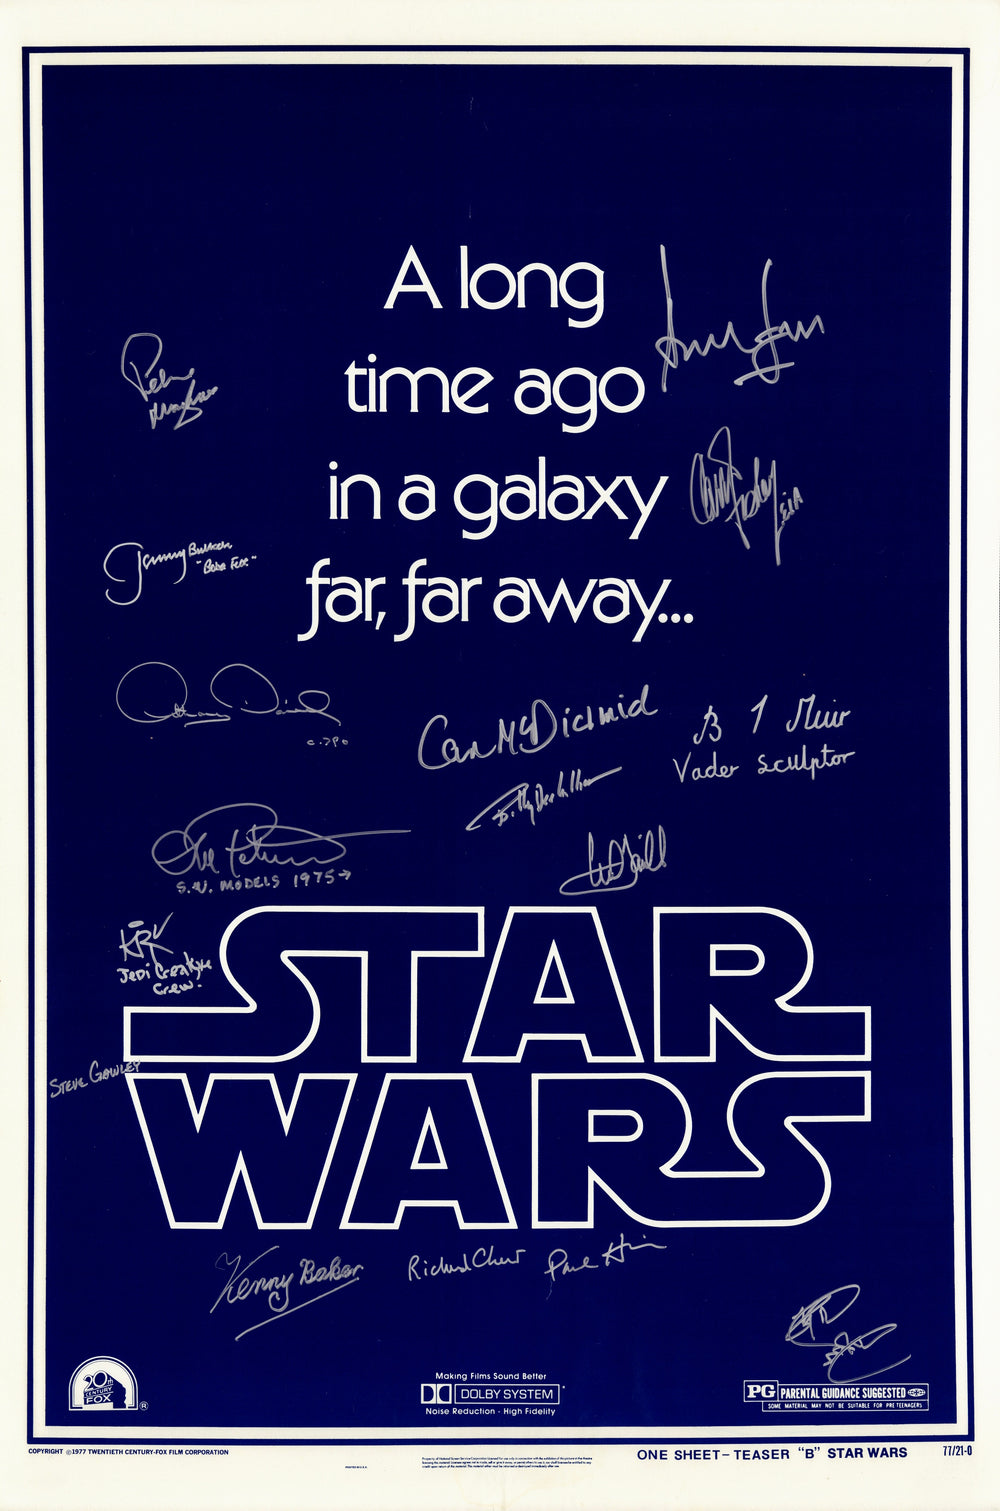 Star Wars Style B Teaser Poster Signed by Harrison Ford, Carrie Fisher, Mark Hamill, Peter Mayhew, Jeremy Bulloch, Anthony Daniels, Ian McDiarmid, Kenny Baker, Billy Dee Williams, & More